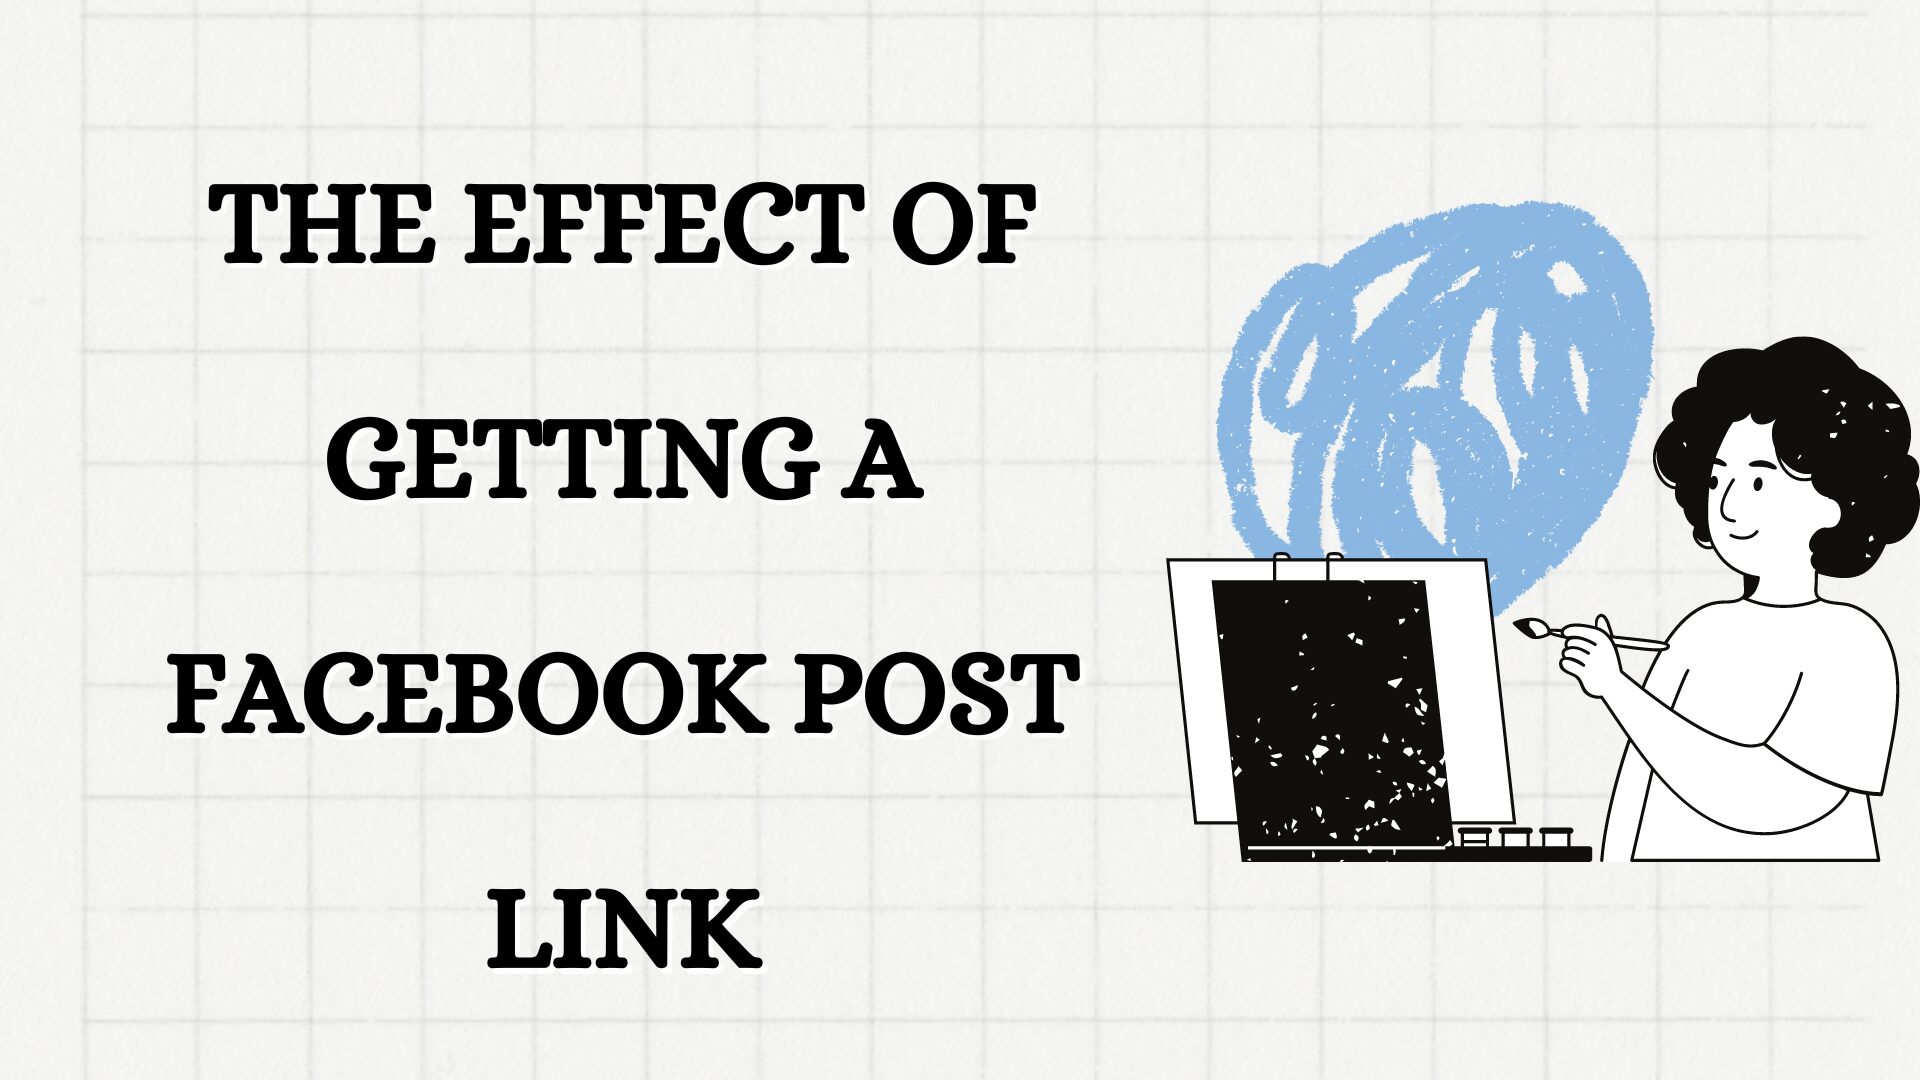 What's the use of getting a Facebook post link?